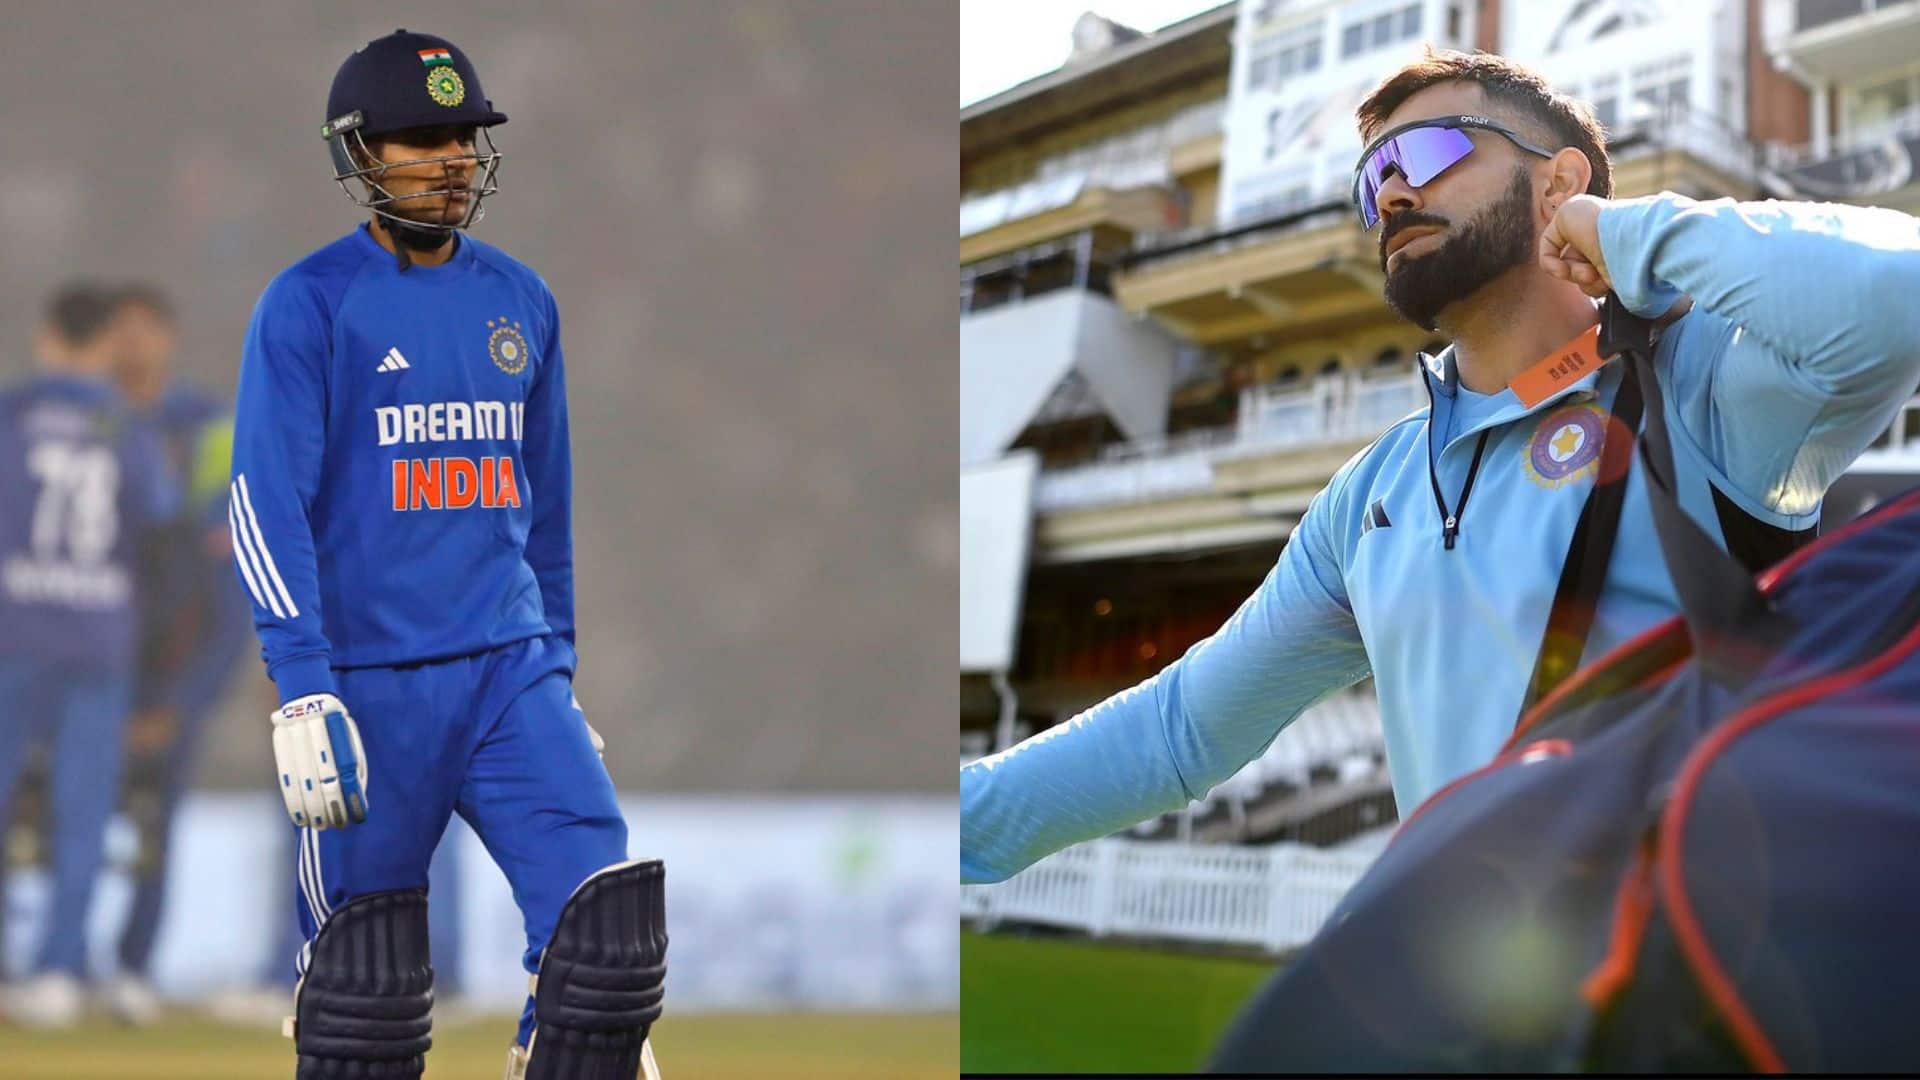 Shubman Gill Out, Virat Kohli In; Here's India's Probable Playing XI For 2nd T20I vs AFG